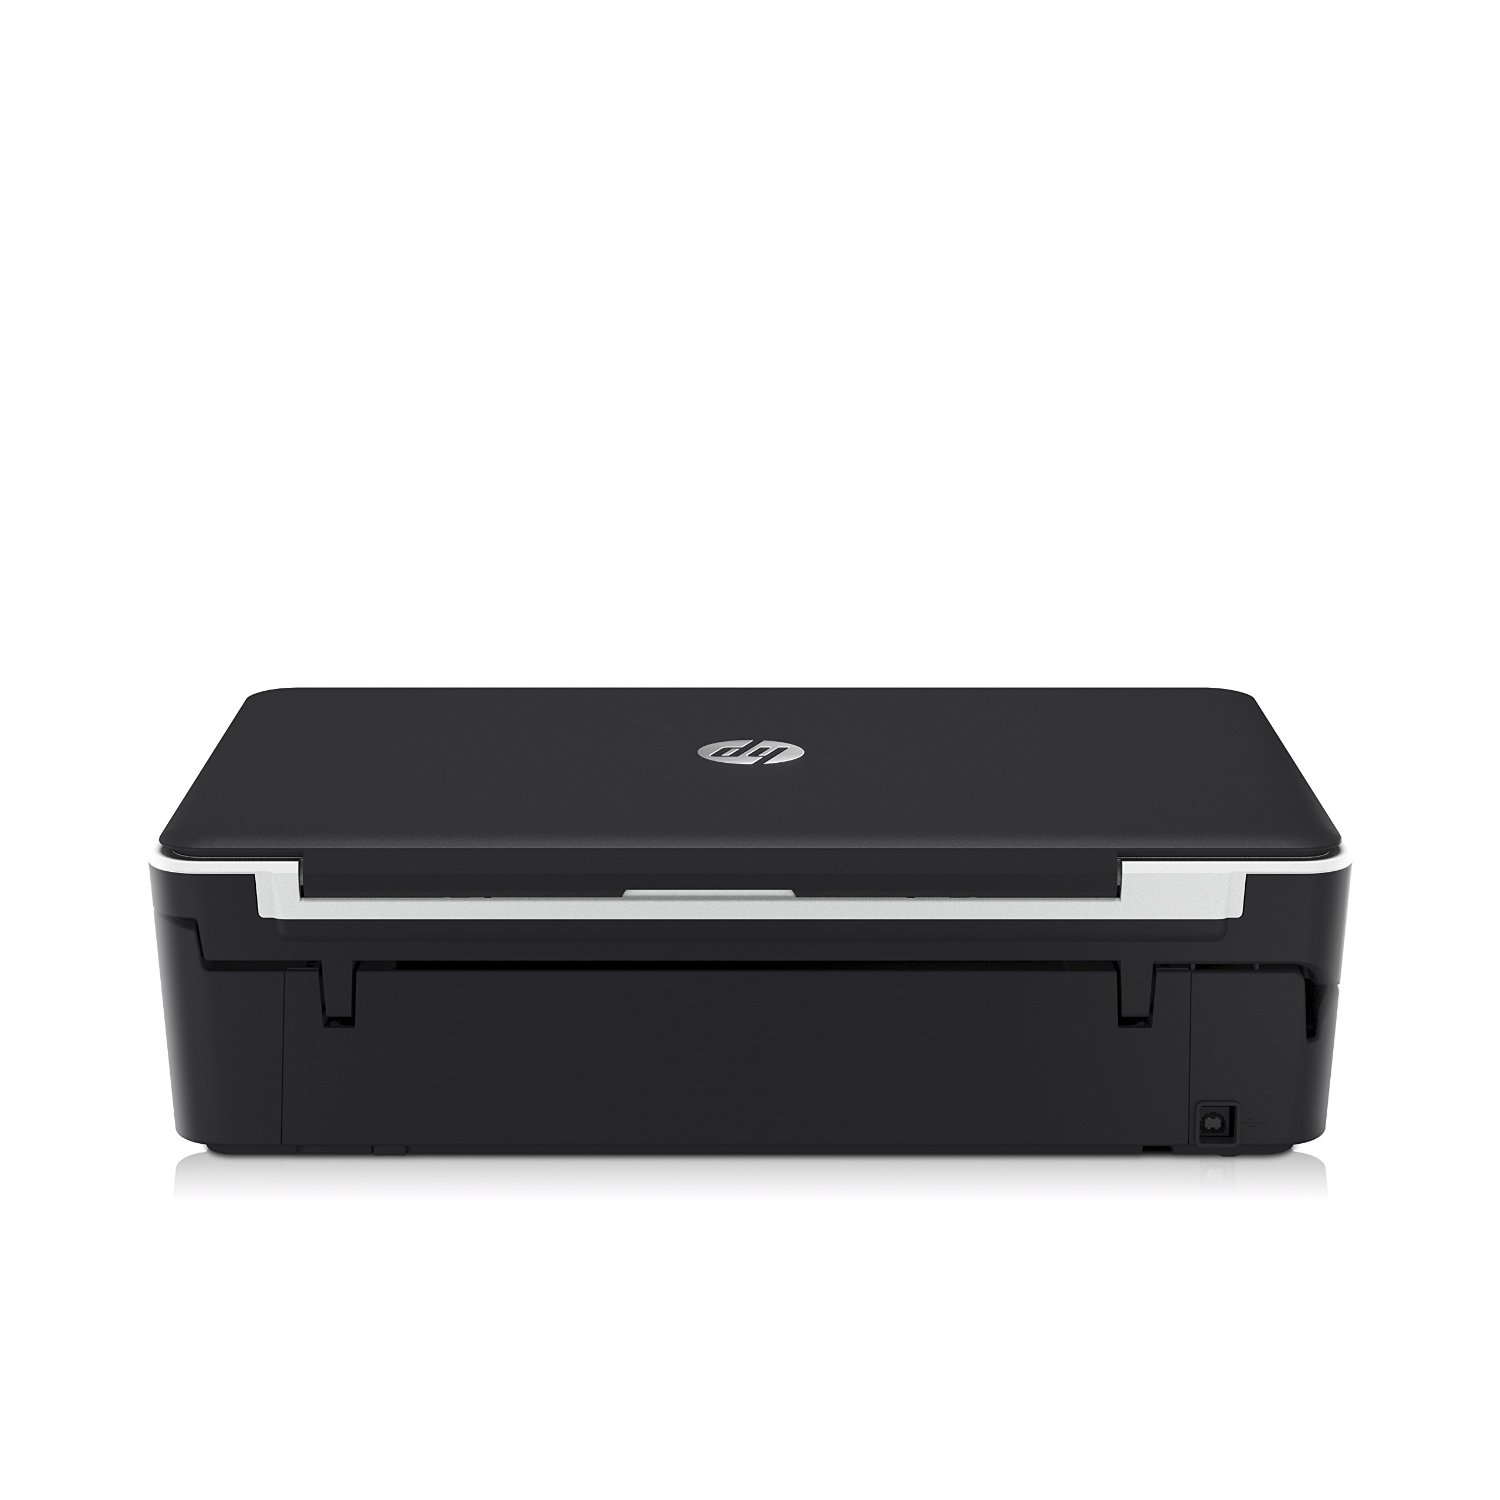 Hp Envy 5534 Wireless All In One Color Photo Printer N3 Free Image Download 0156